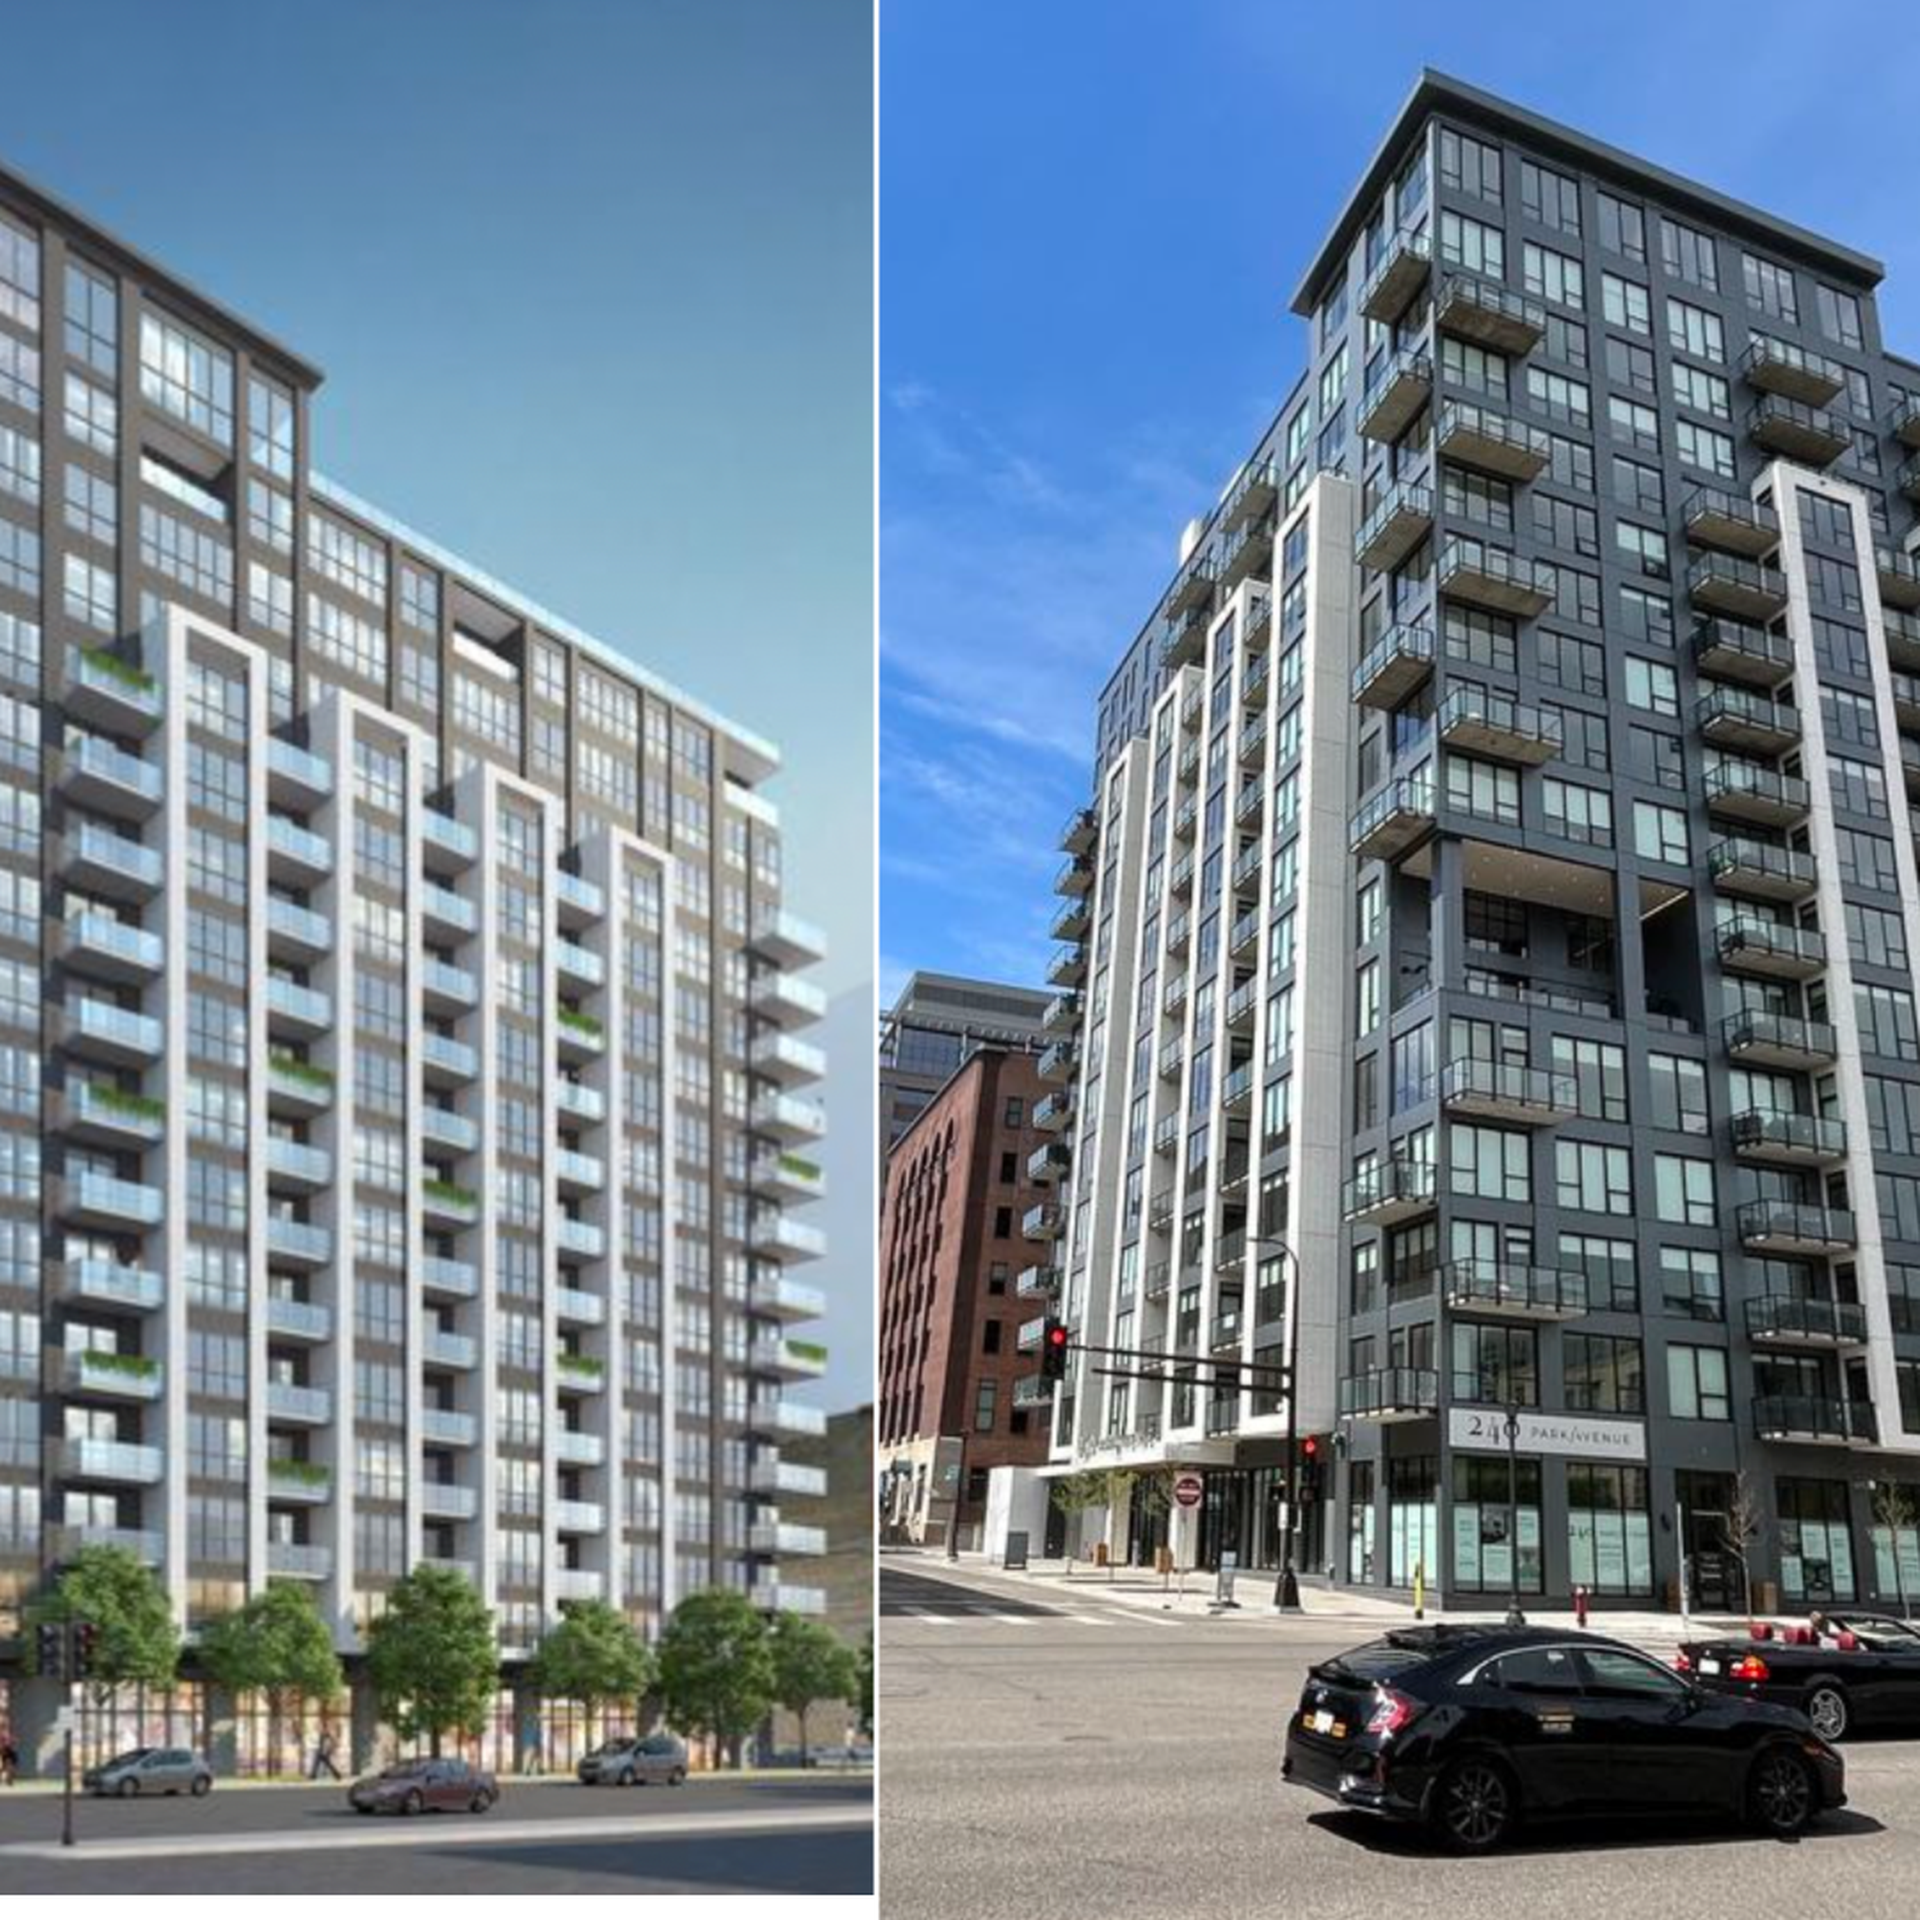 An image of a rendering of a downtown Minneapolis apartment tower, next to a photo of the actual building after construction completed.